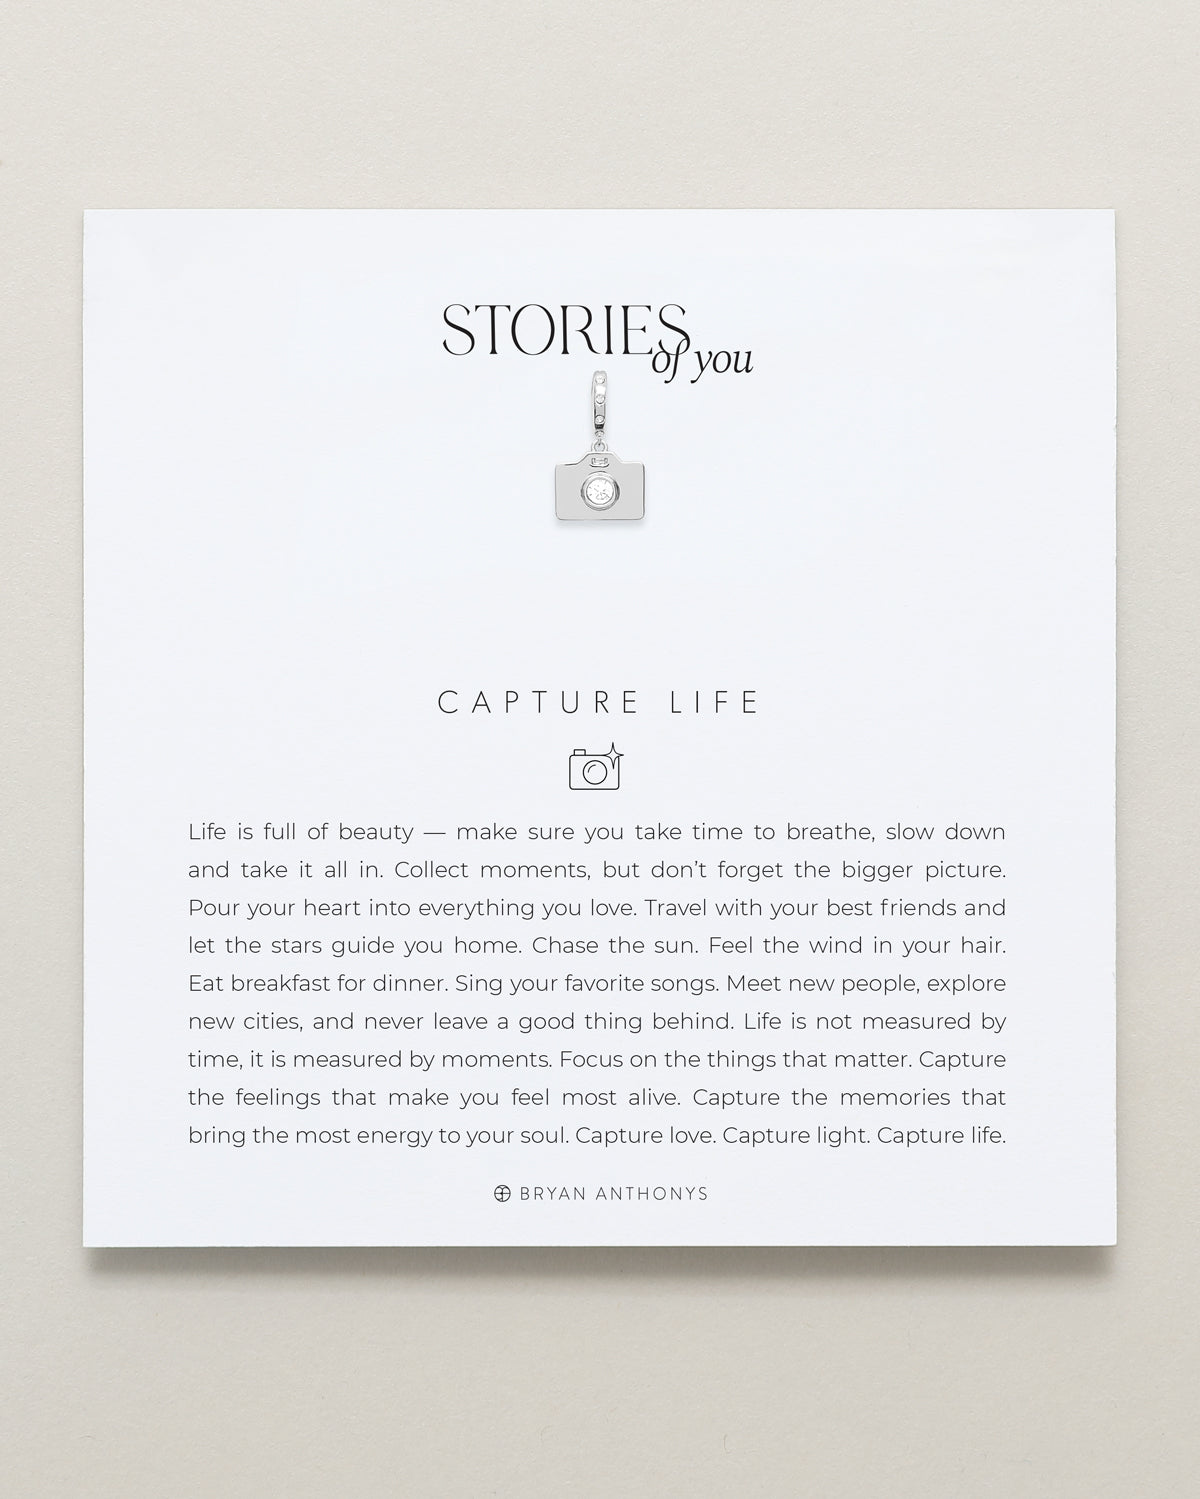 Bryan Anthonys Stories of You Silver Capture Life Charm On Card